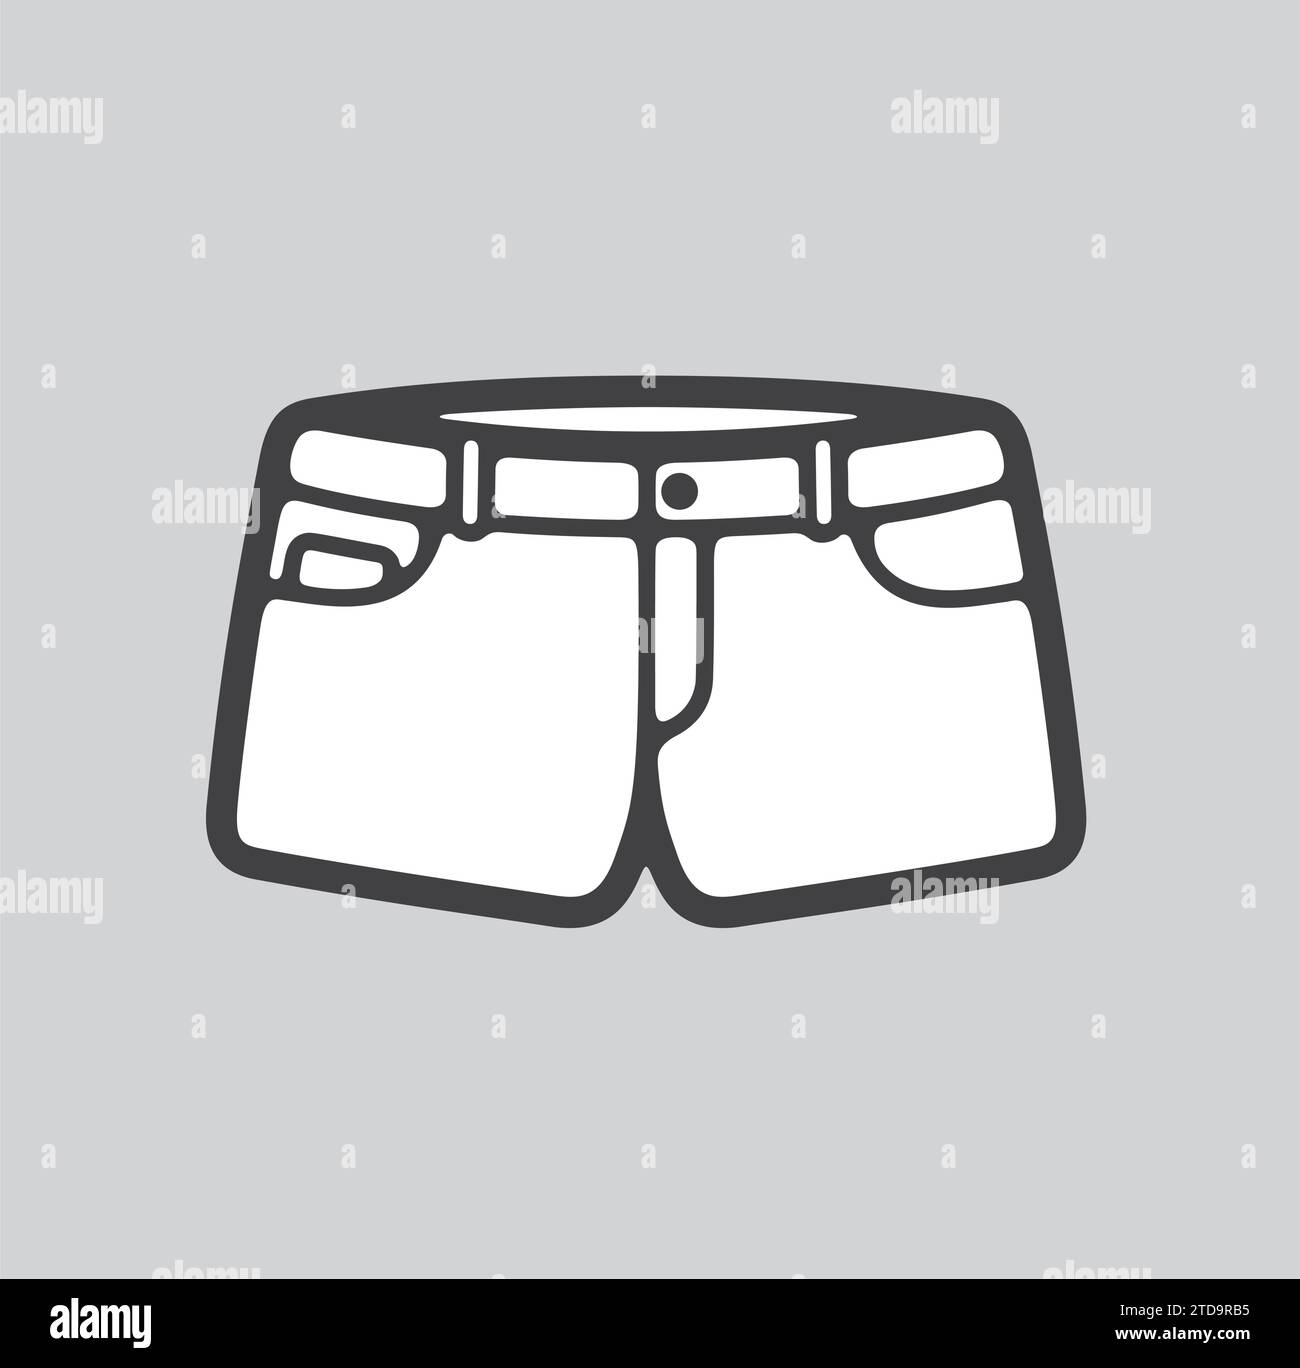 Denim shorts line icon on a background. Vector illustration. Stock Vector